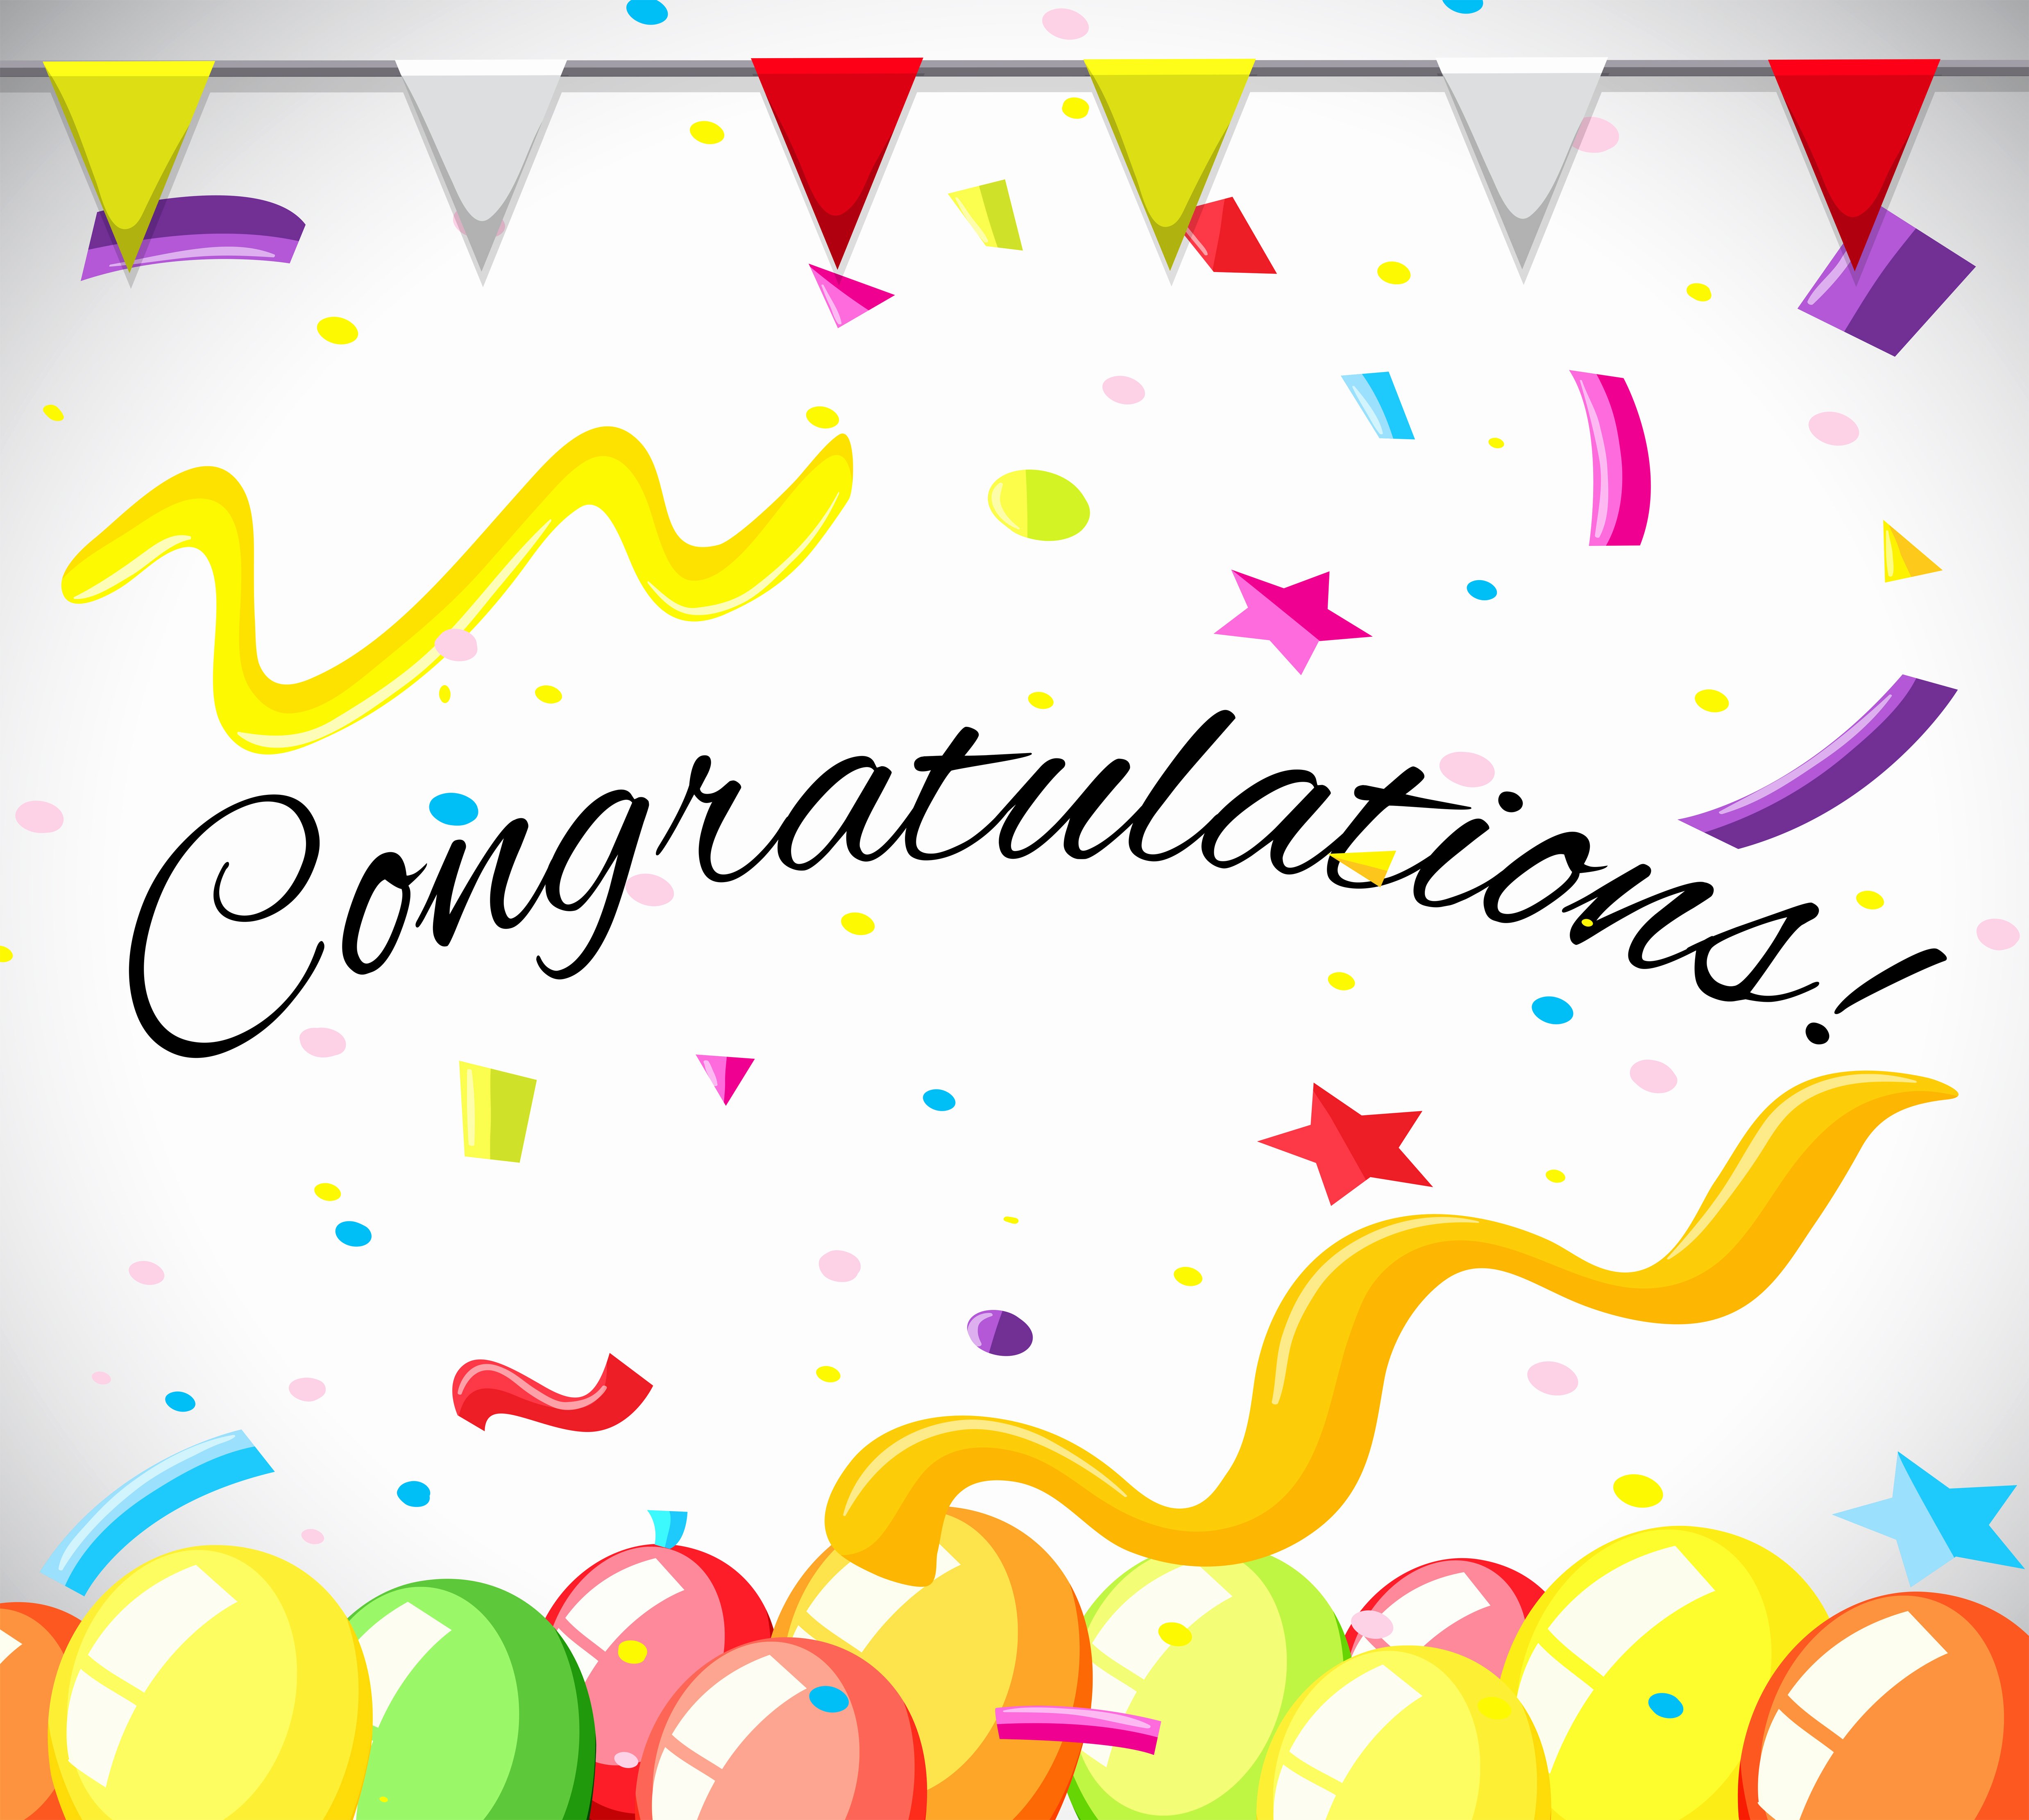 Free Printable Congratulations Cards Awesome Congratulations Free Vector Art Free Downloads